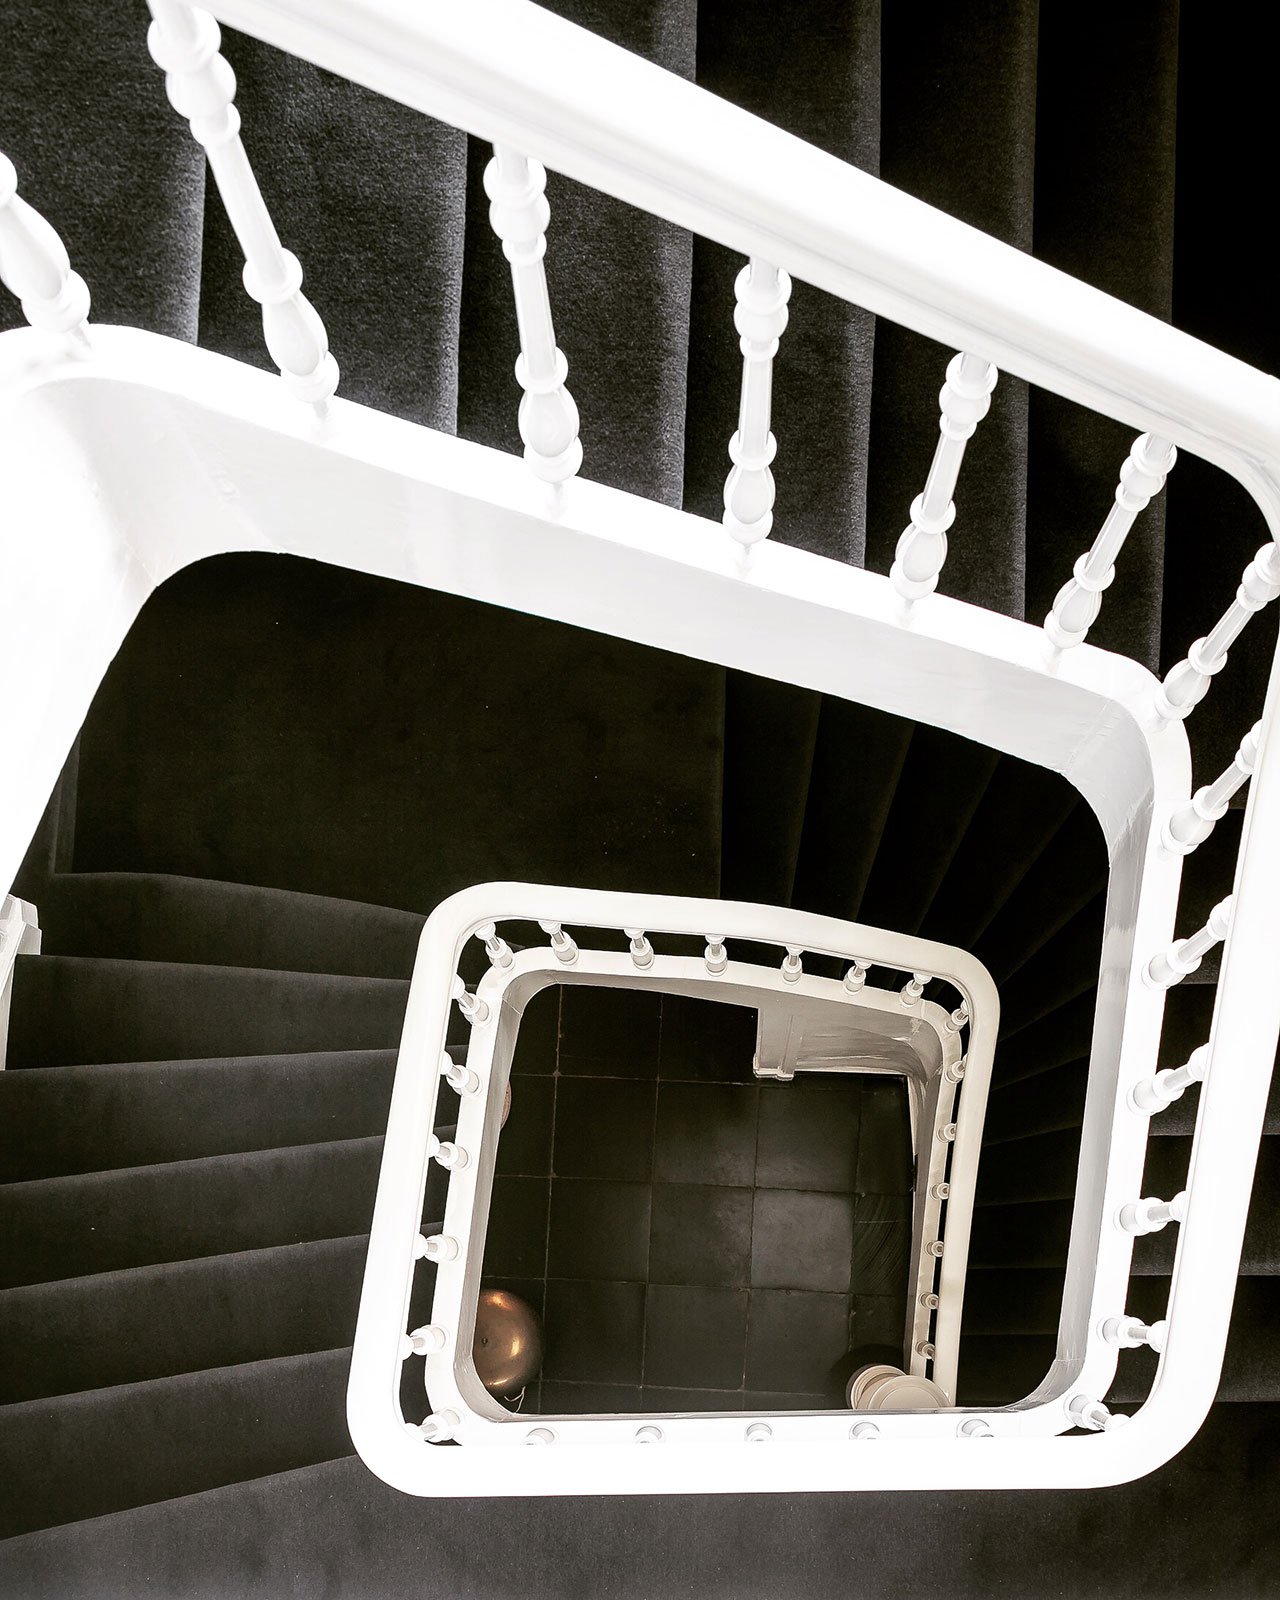 The staircase is black and white, truly minimalist, a restored piece of the 19th century